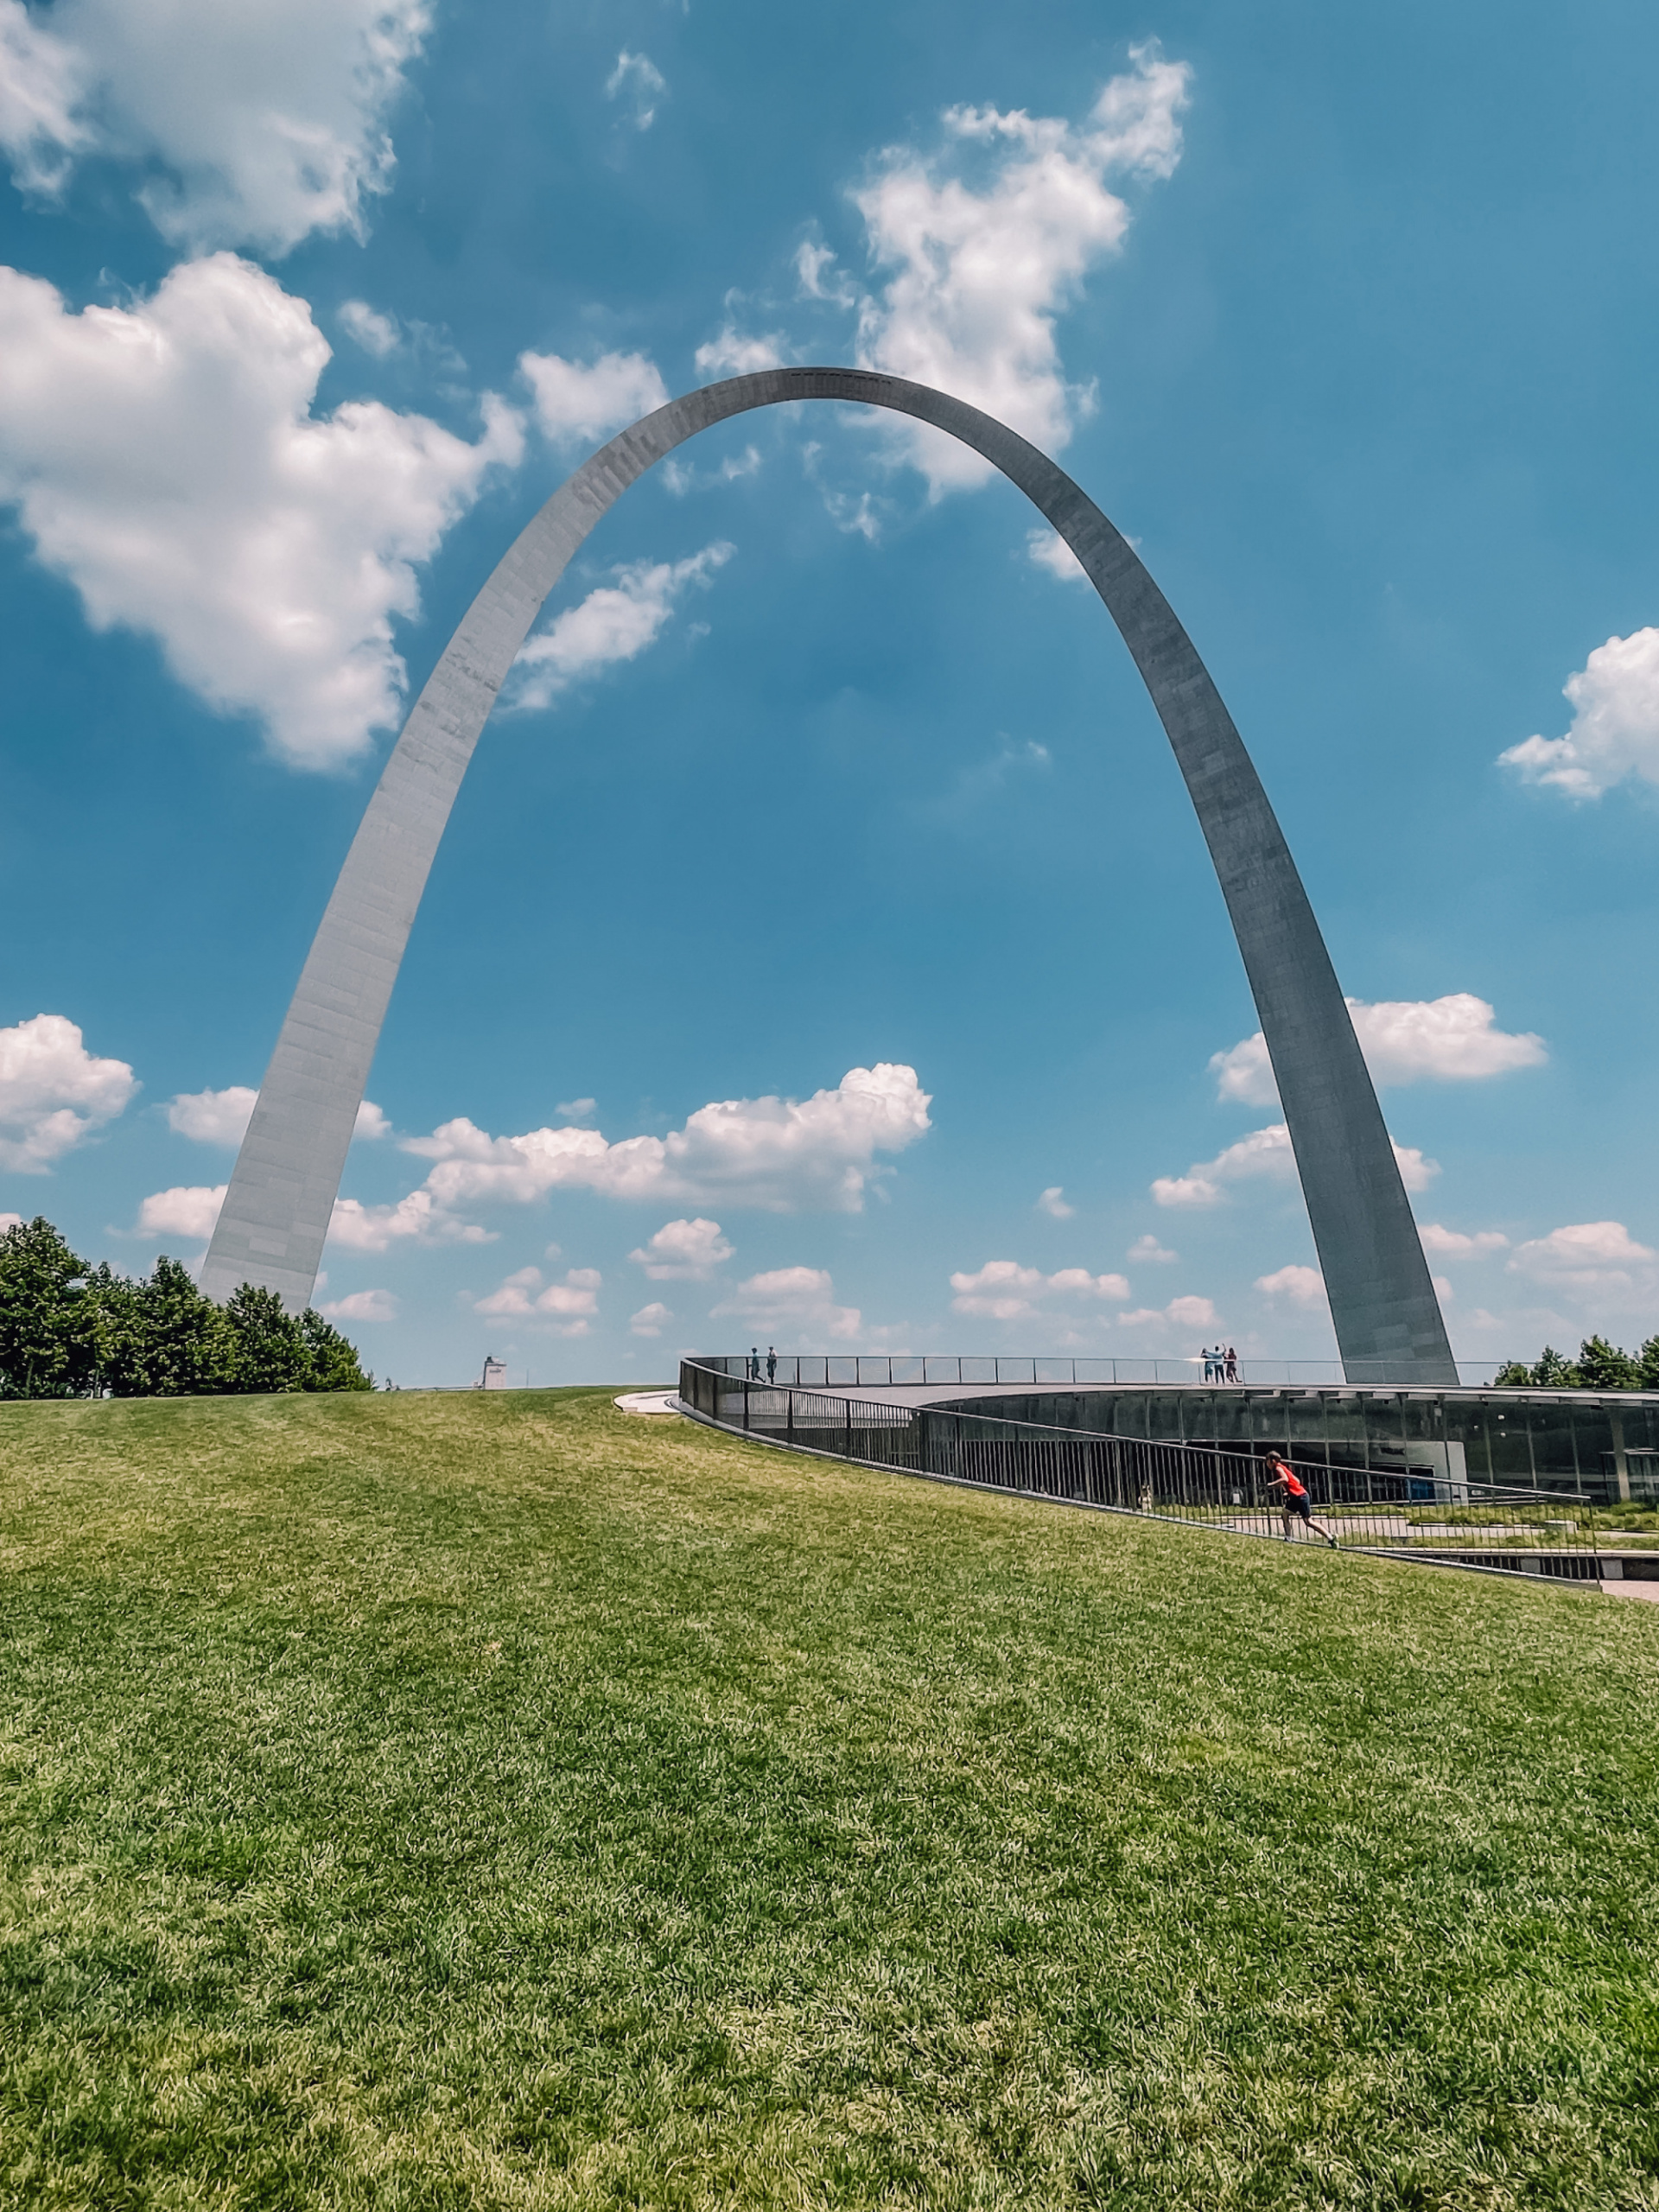 where to stop on a cross-country road trip, best places to stop on a cross country road trip, cross country road trip, west coast to east coast road trip, erin busbee, traveling with kids, how to travel with kids, how to travel with a dog, cross country road trip with kids, st. louis, Missouri, the gateway arch, gateway arch national park, cross country busbee style, family road trip